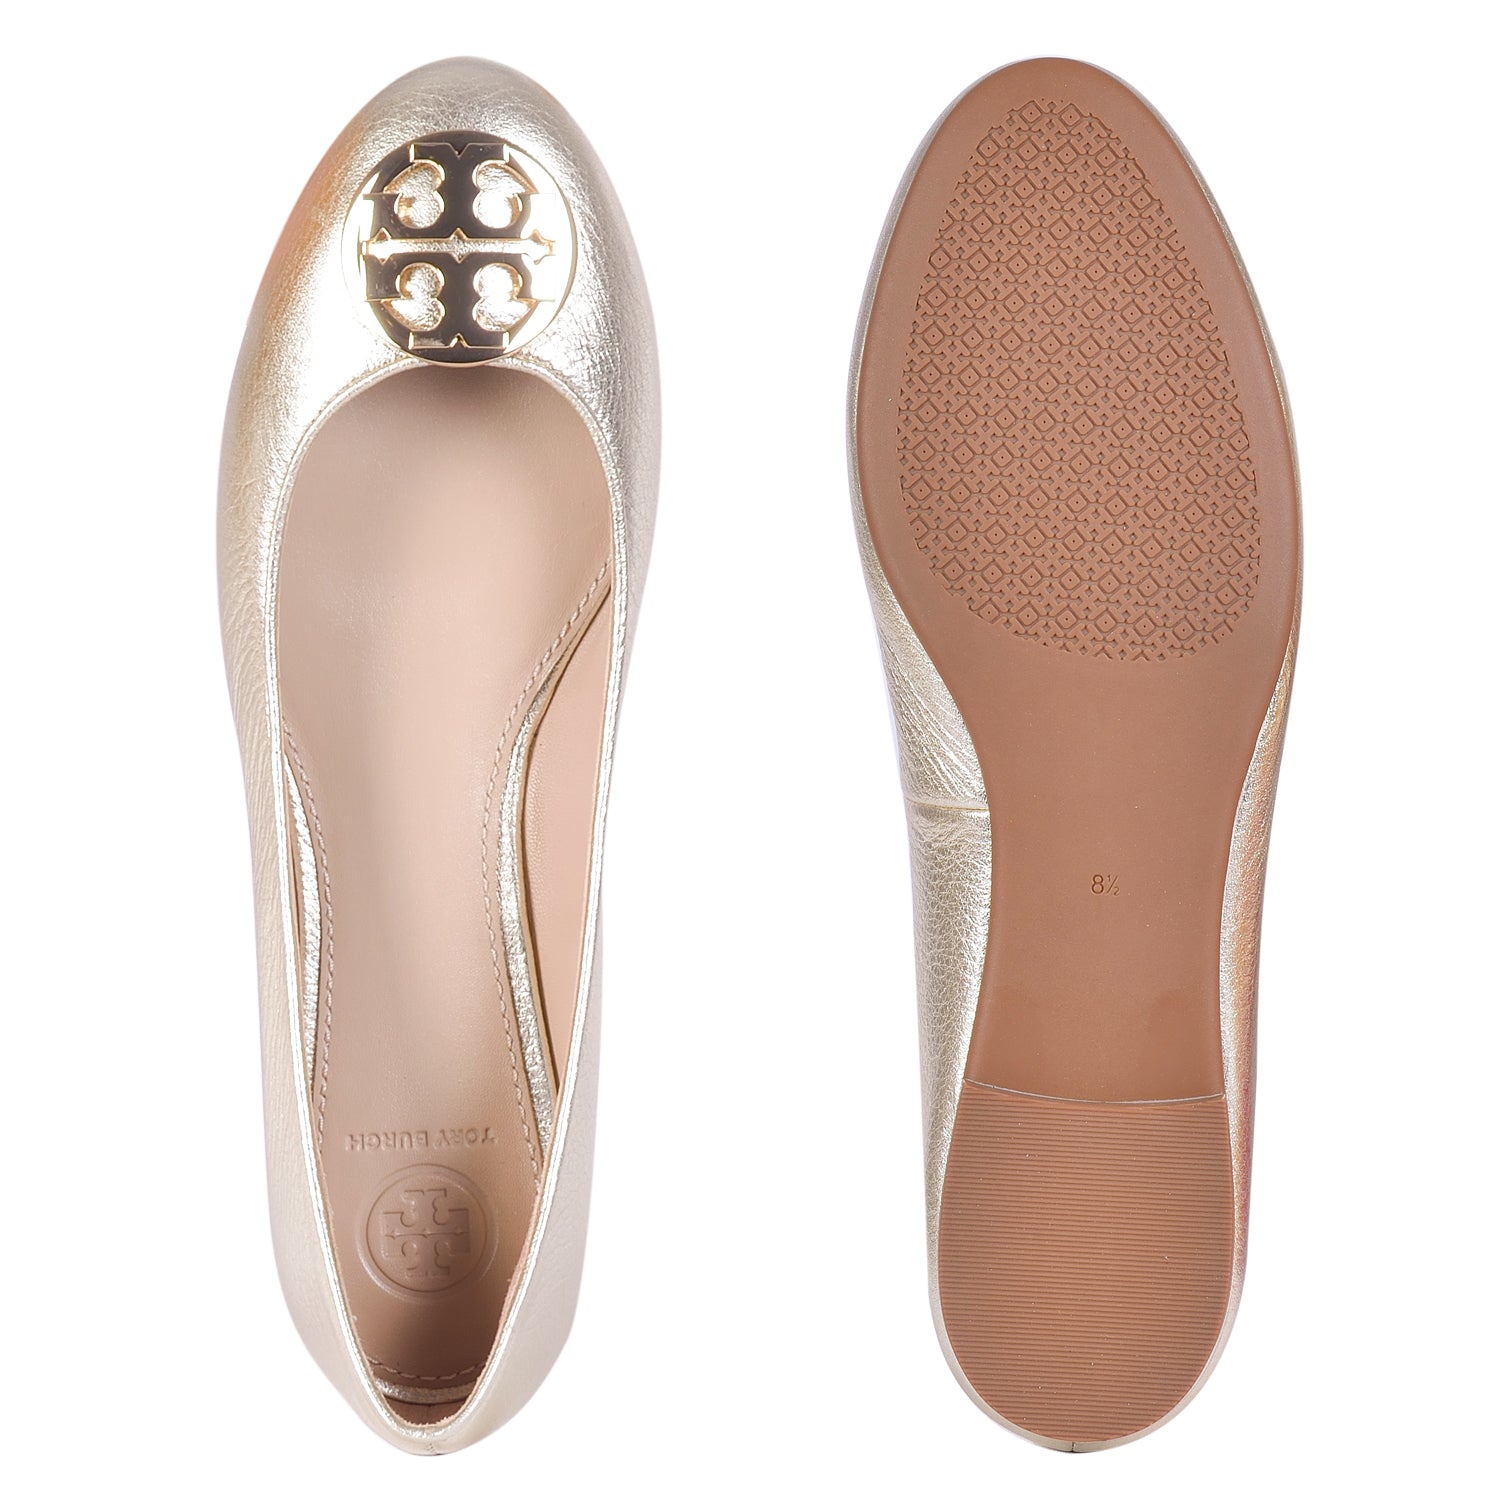 TORY BURCH CLAIRE BALLET TUMBLED LEATHER SPARK GOLD / GOLD